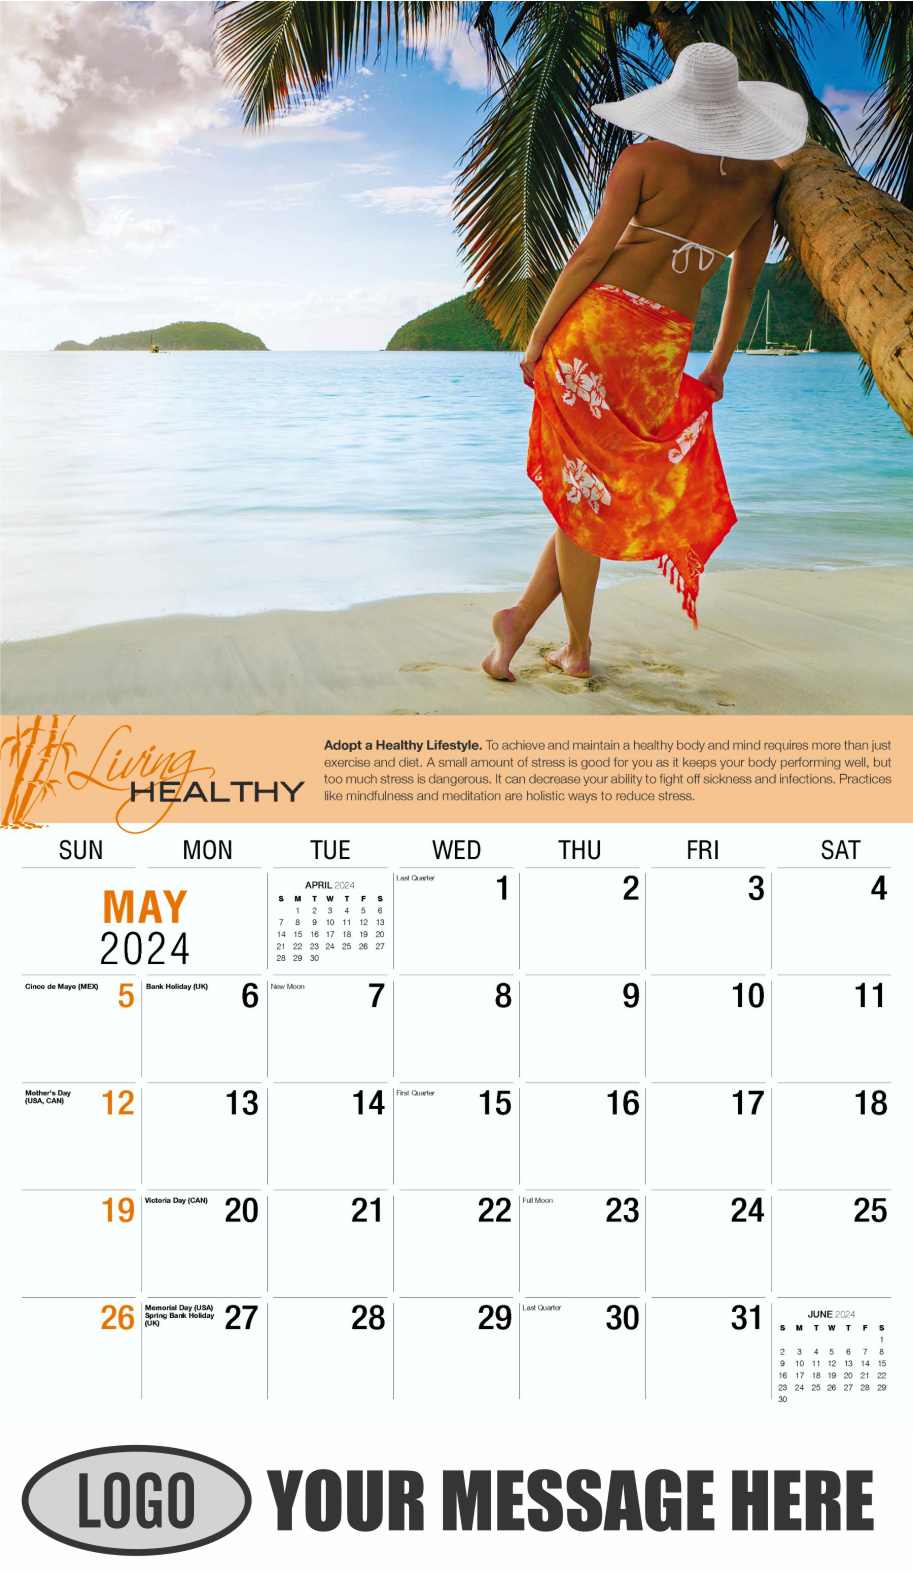 Living Healthy 2024 Business Promotional Calendar - May